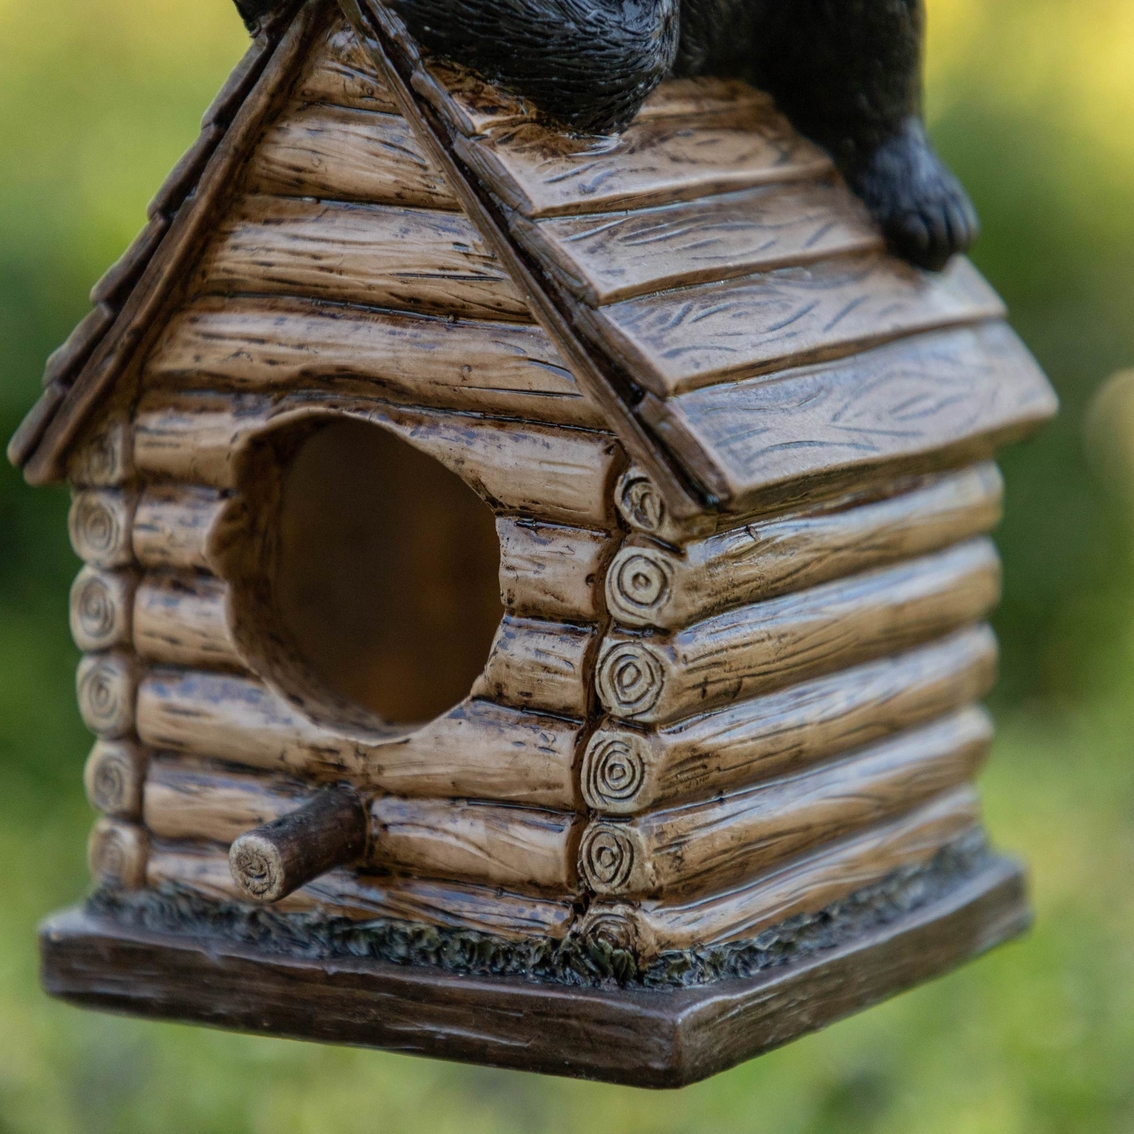 Alpine Resting Bear on Log Cabin Birdhouse, 8 in. Tall - Image 4 of 5